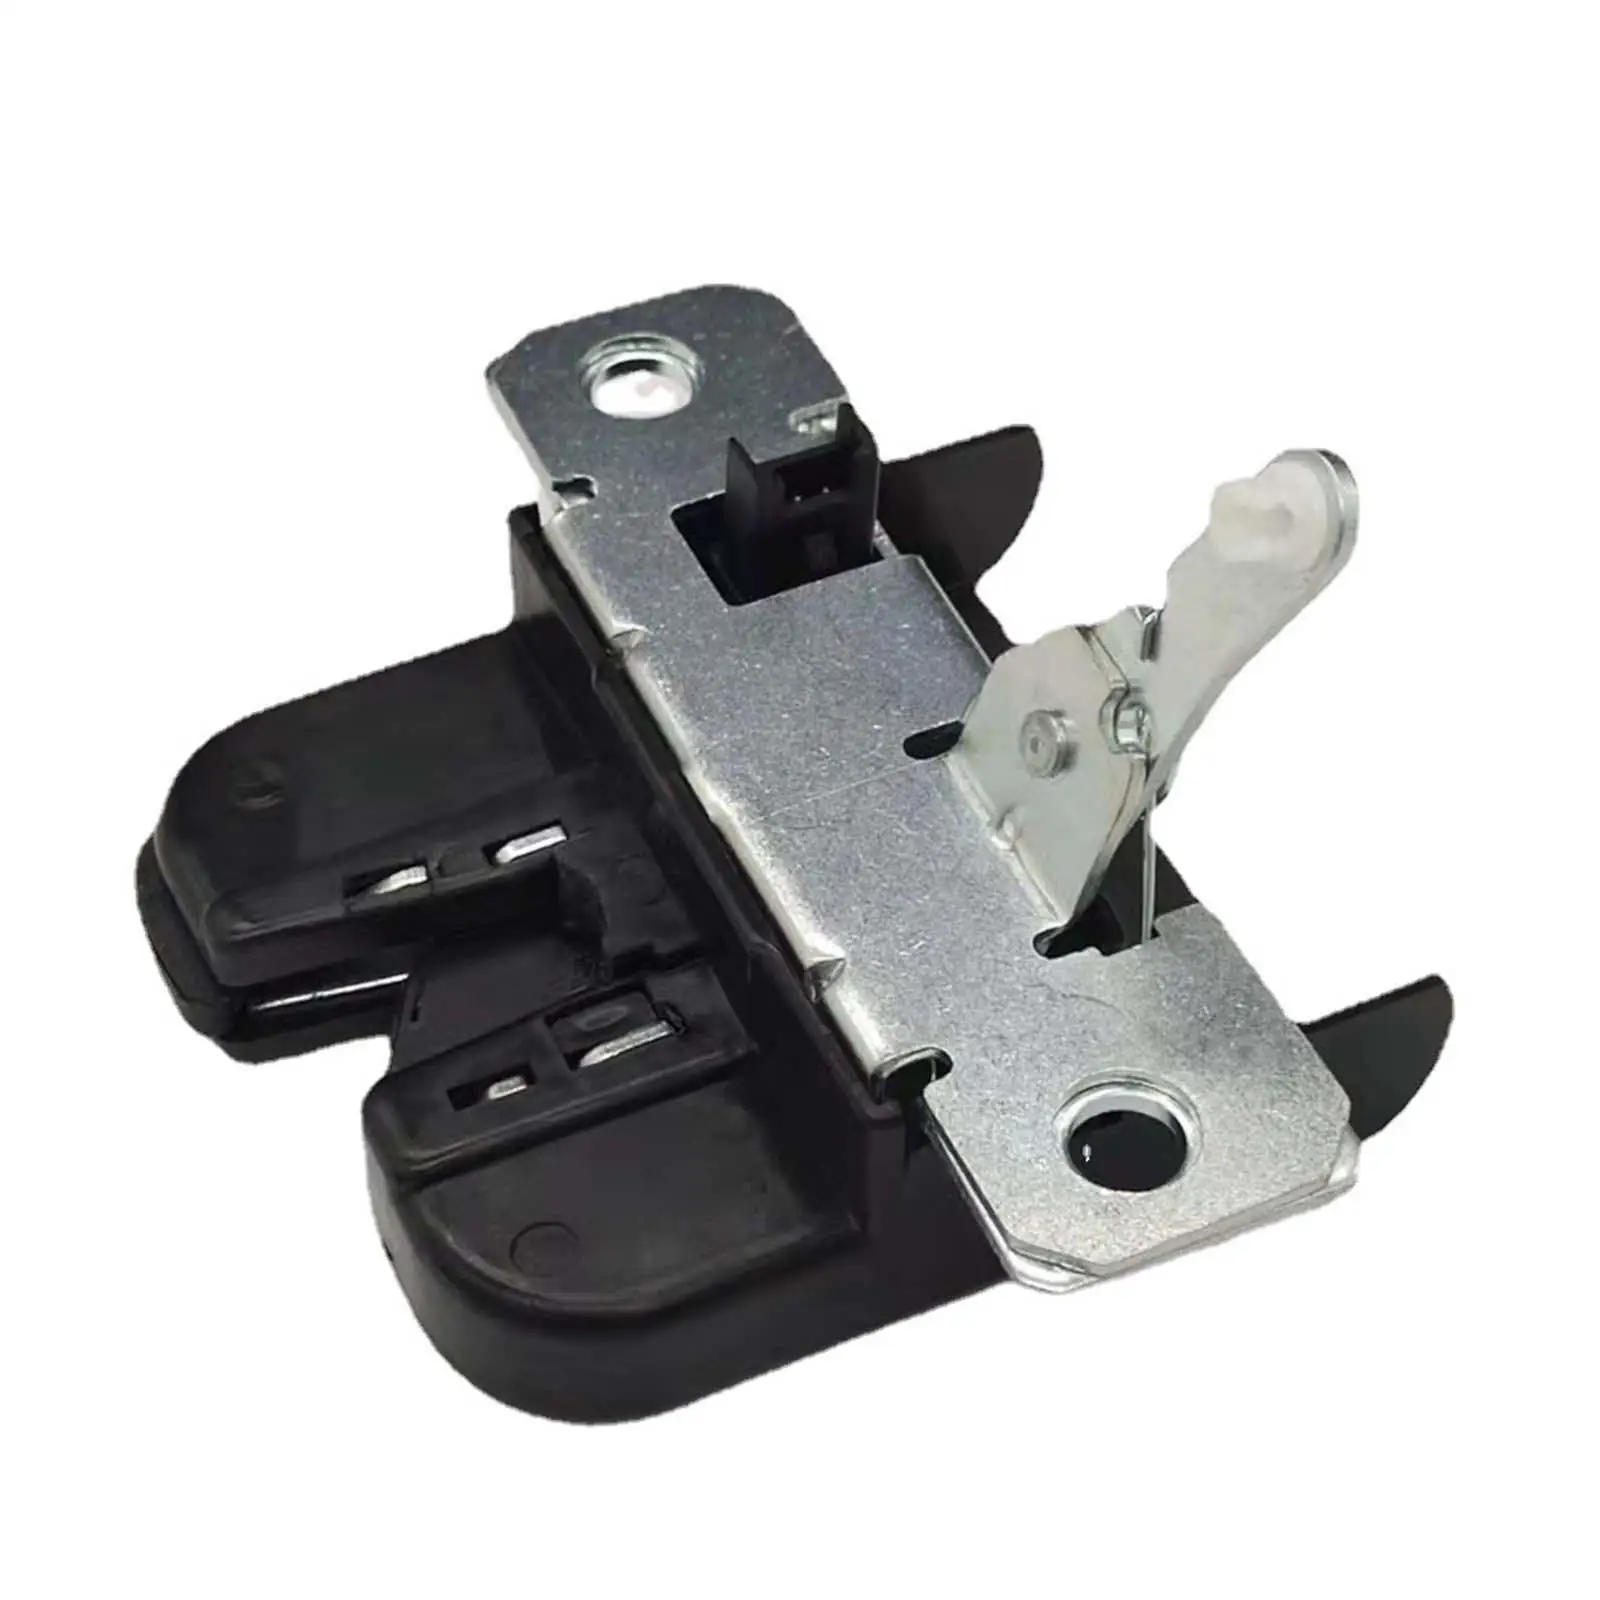 Rear Tailgate Boot Lock 1J6827505 Replaces 1J6827505B for VW Golf Sturdy Easily Install Automobile Repairing Accessory